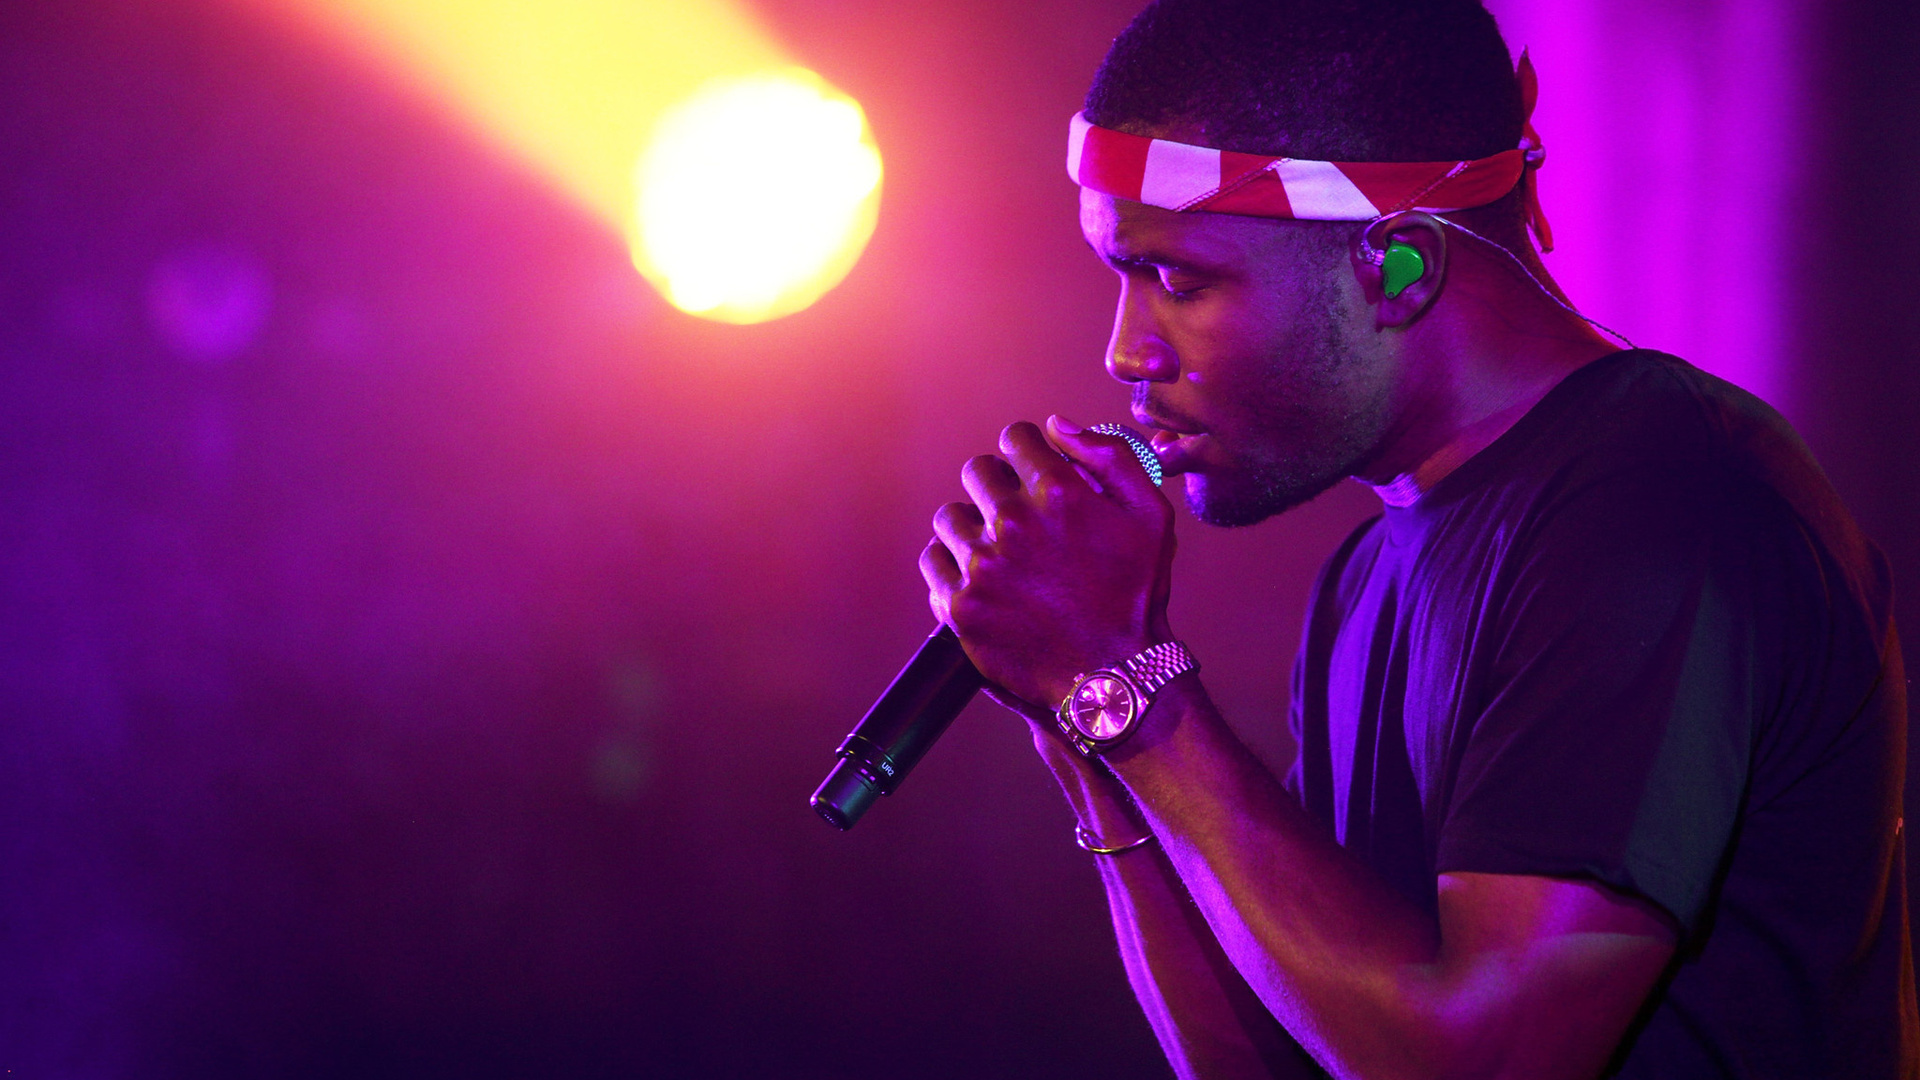 Frank Ocean Wallpapers Images Photos Pictures Backgrounds